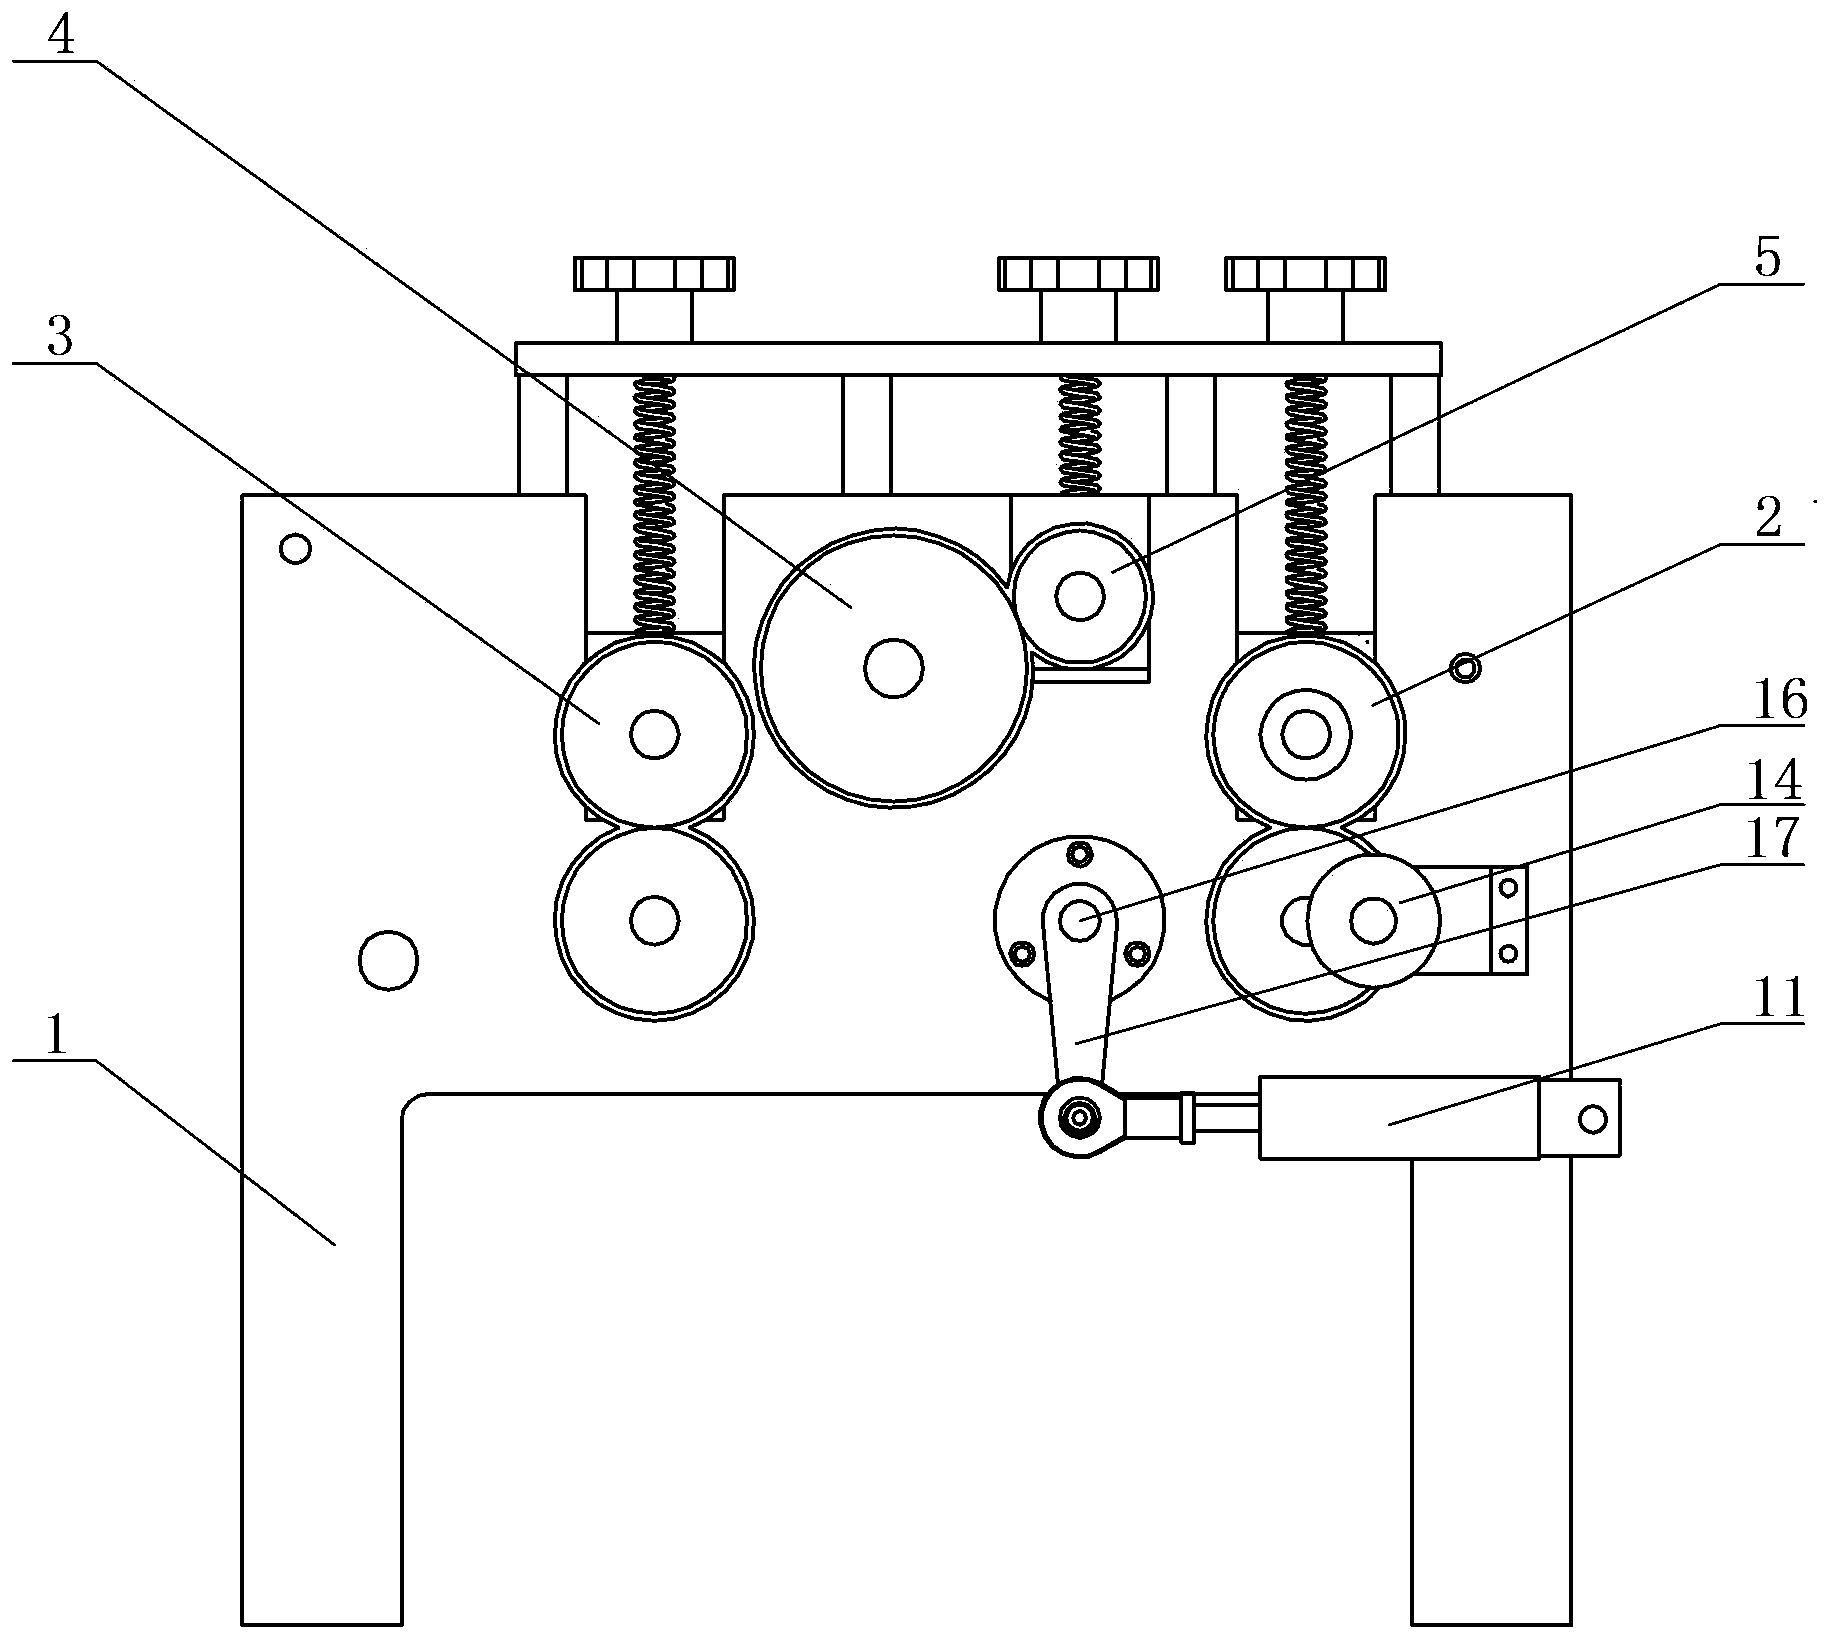 Spacing-adjustable gluing mechanism capable of keeping gluing face upwards